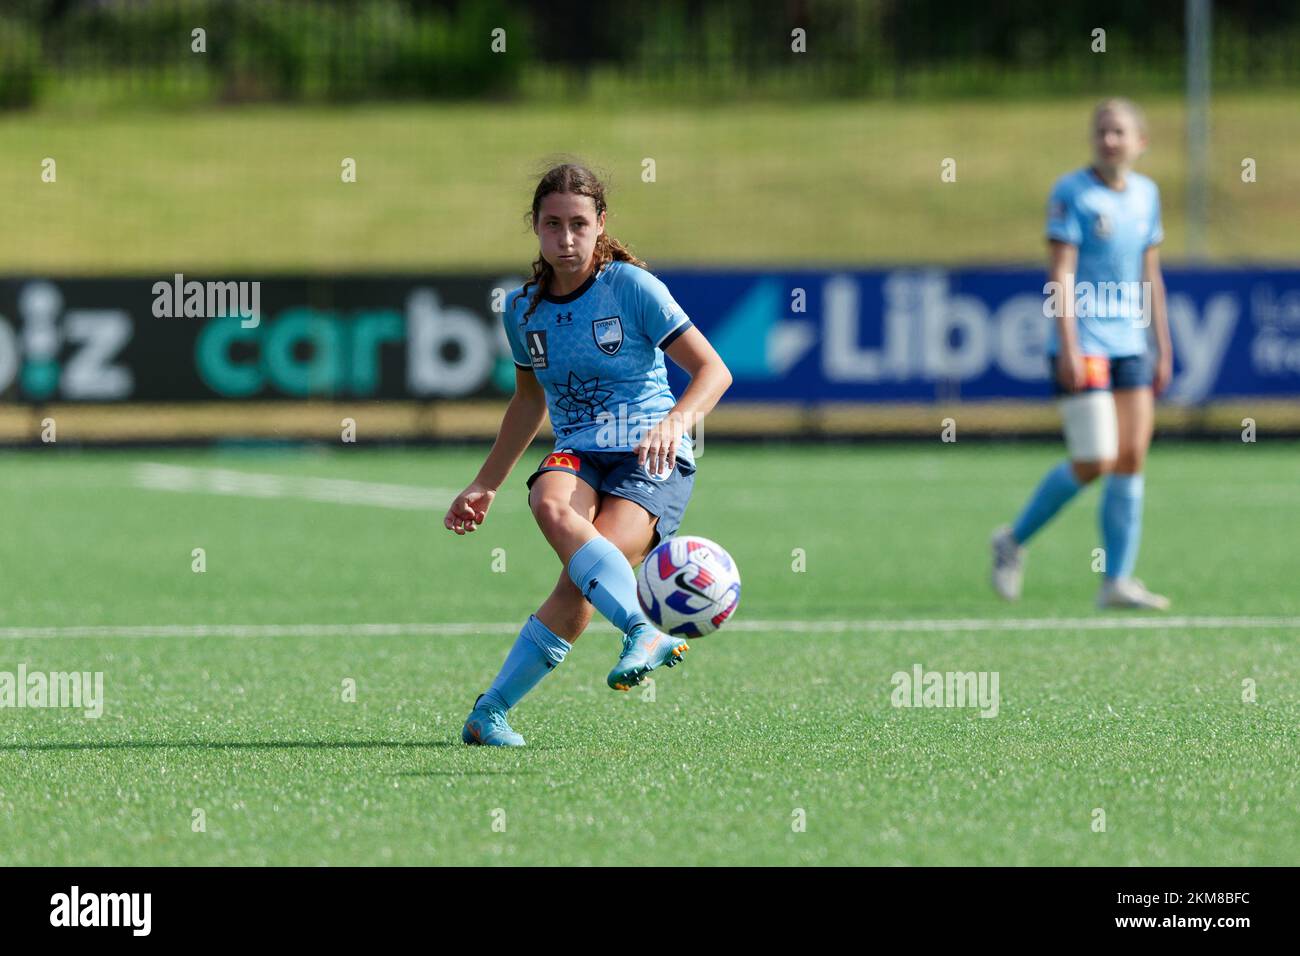 Sydney, Australia. 26th Nov, 2022. Sarah Hunter of Sydney FC pass the ball during the match between Sydney FC and Melbourne Victory at Cromer Park on November 26, 2022 in Sydney, Australia Credit: IOIO IMAGES/Alamy Live News Stock Photo